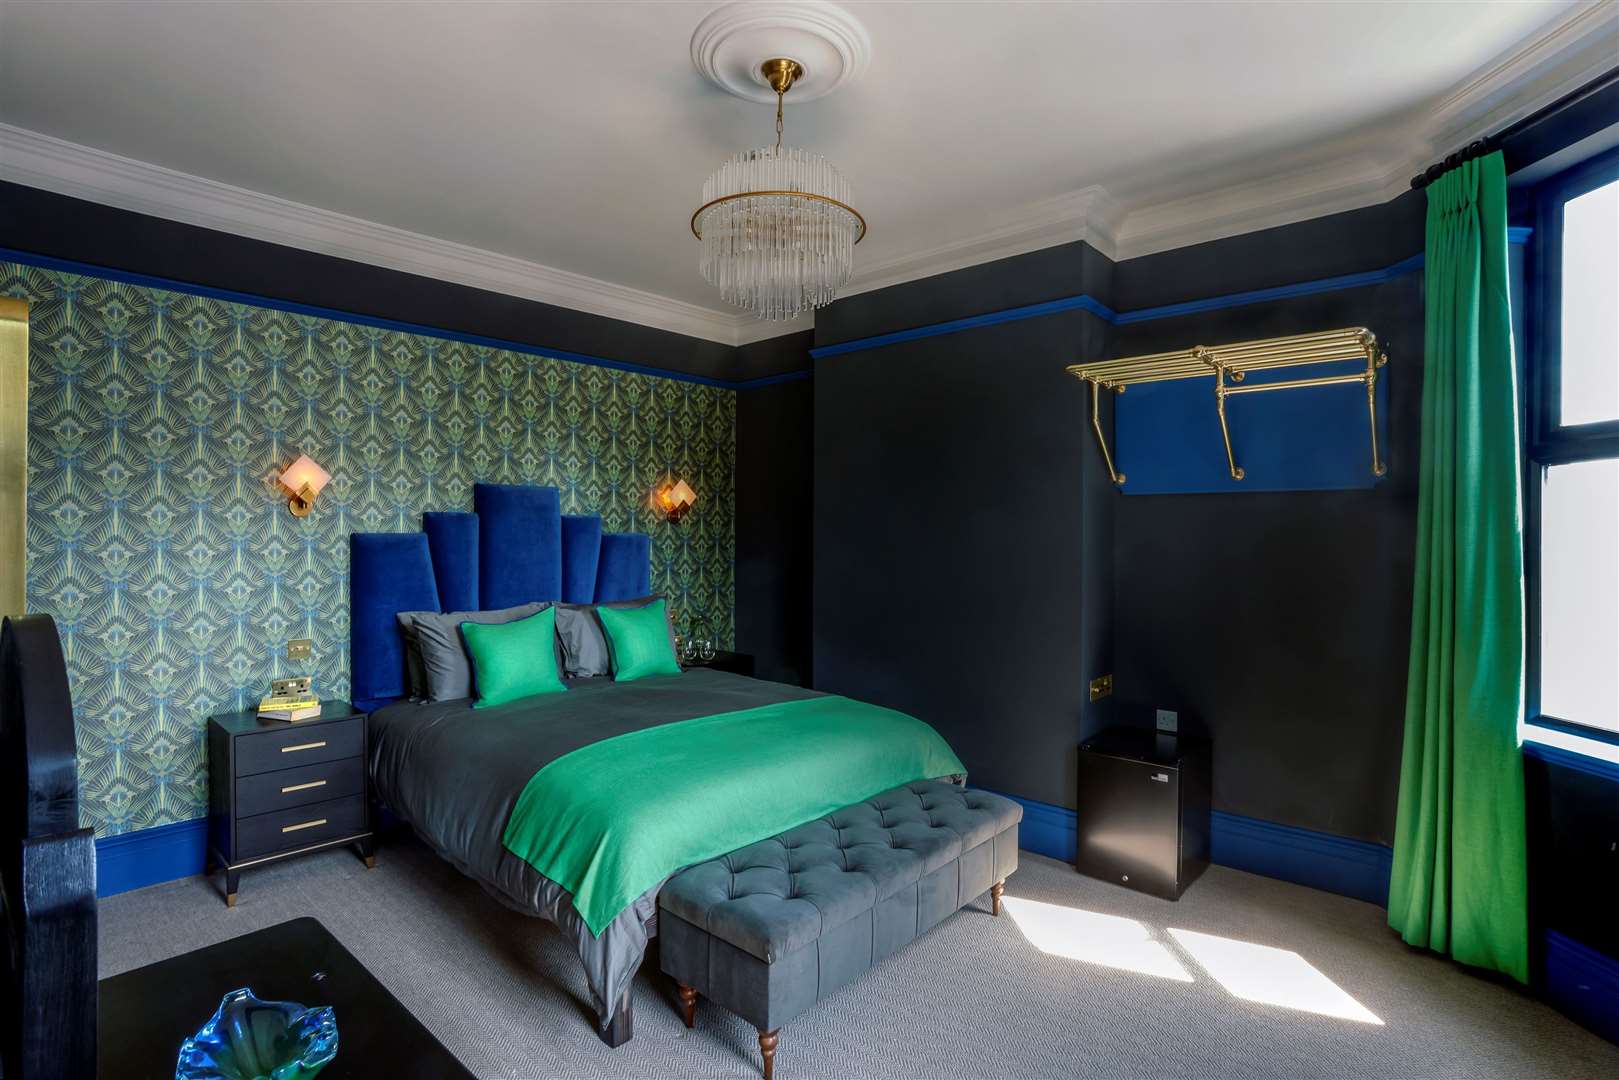 One of the bedrooms a the new-look Bedford Inn. Pic: The Bedford Inn